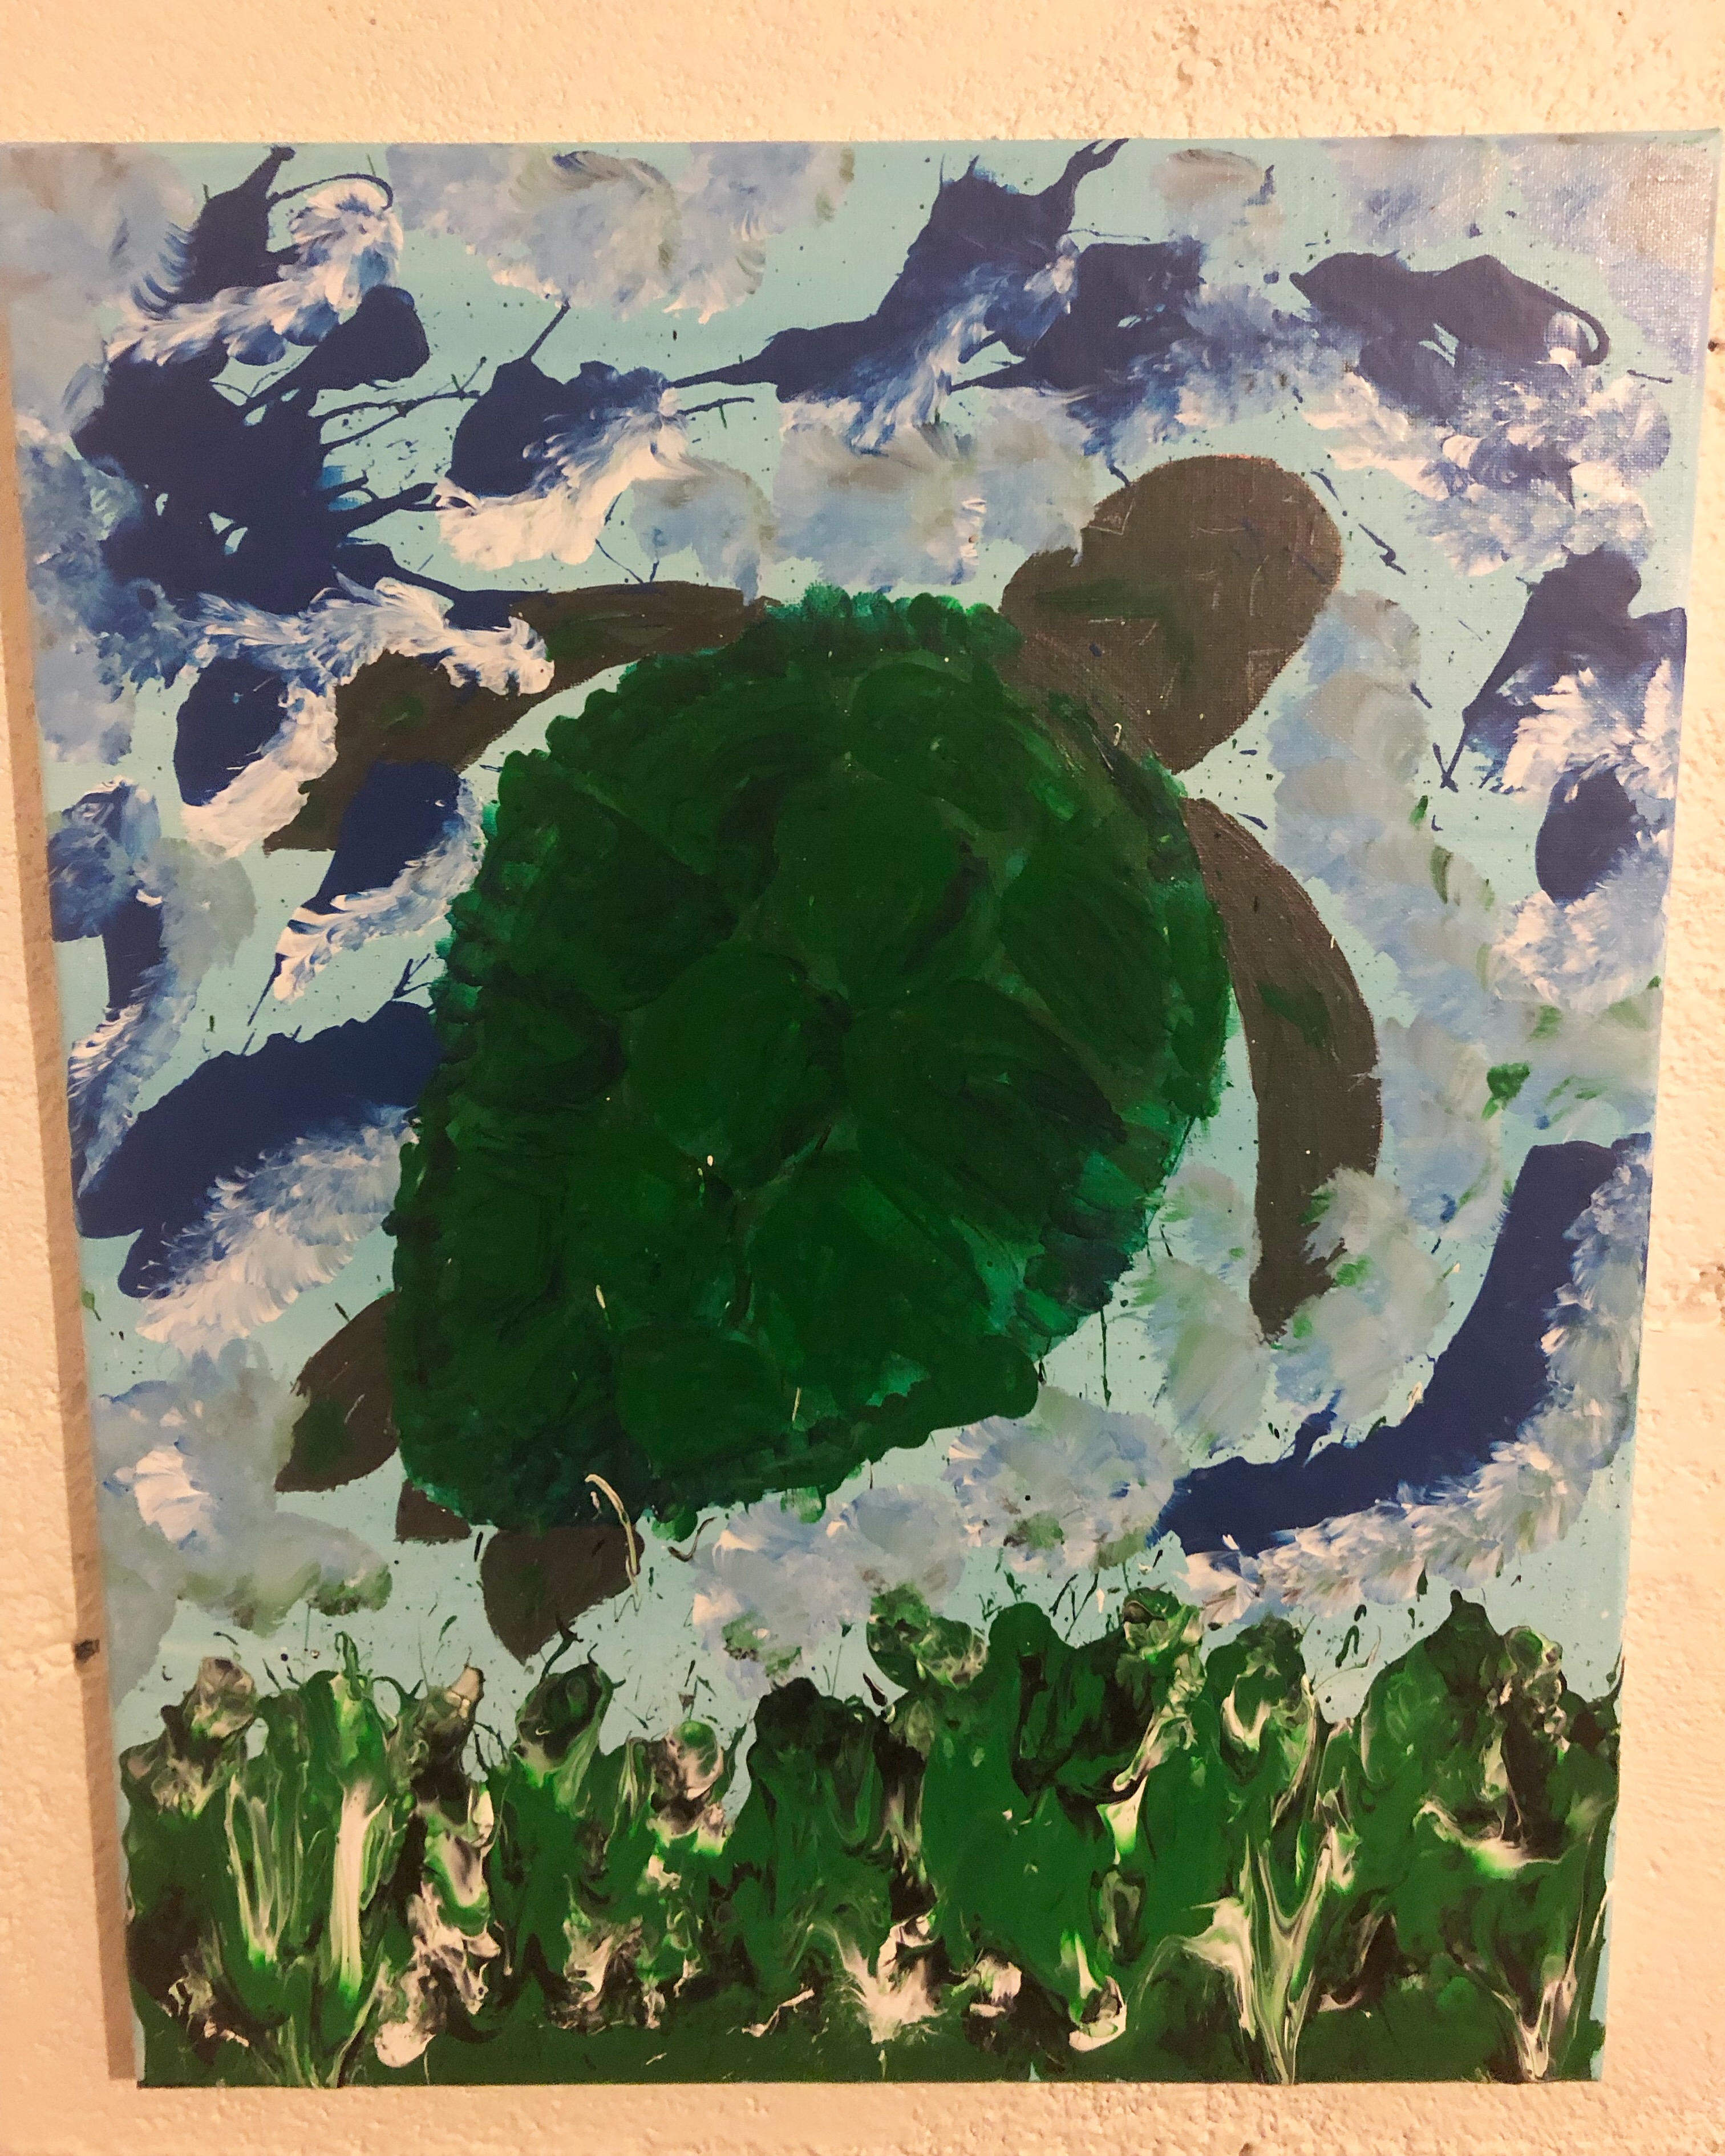 Turtle painting
16x20 In
